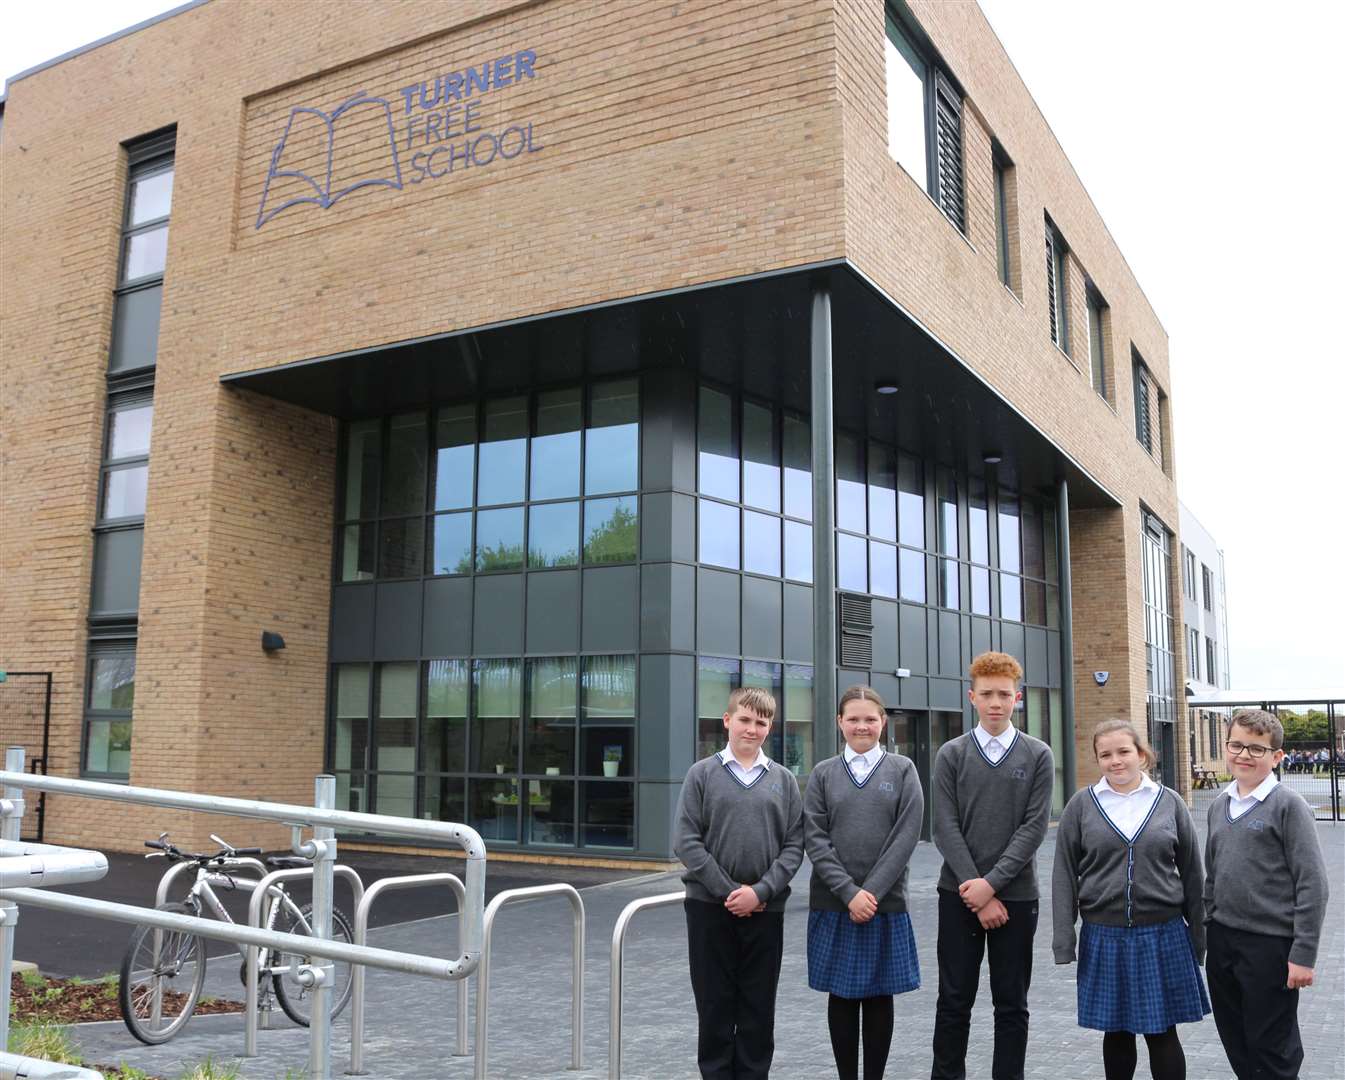 Turner Free School's new building has now opened. All photos: Turner Free School